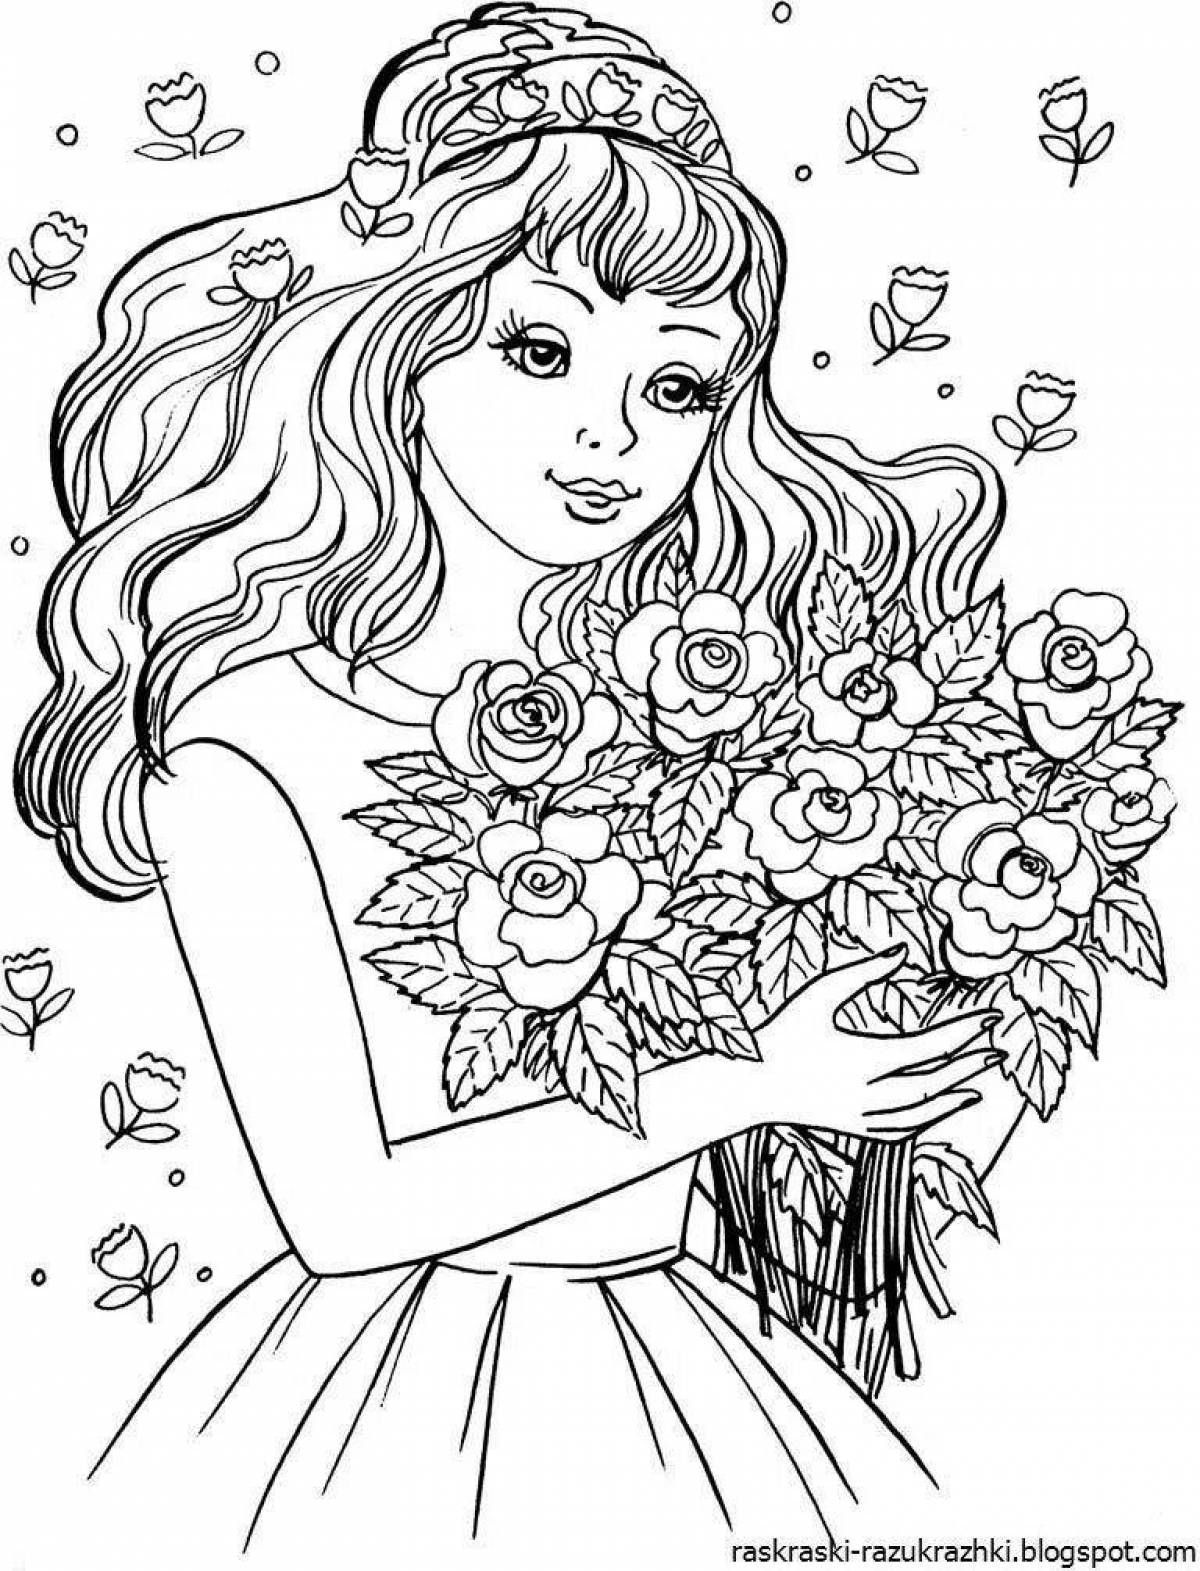 Live coloring for girls 5-6 years old